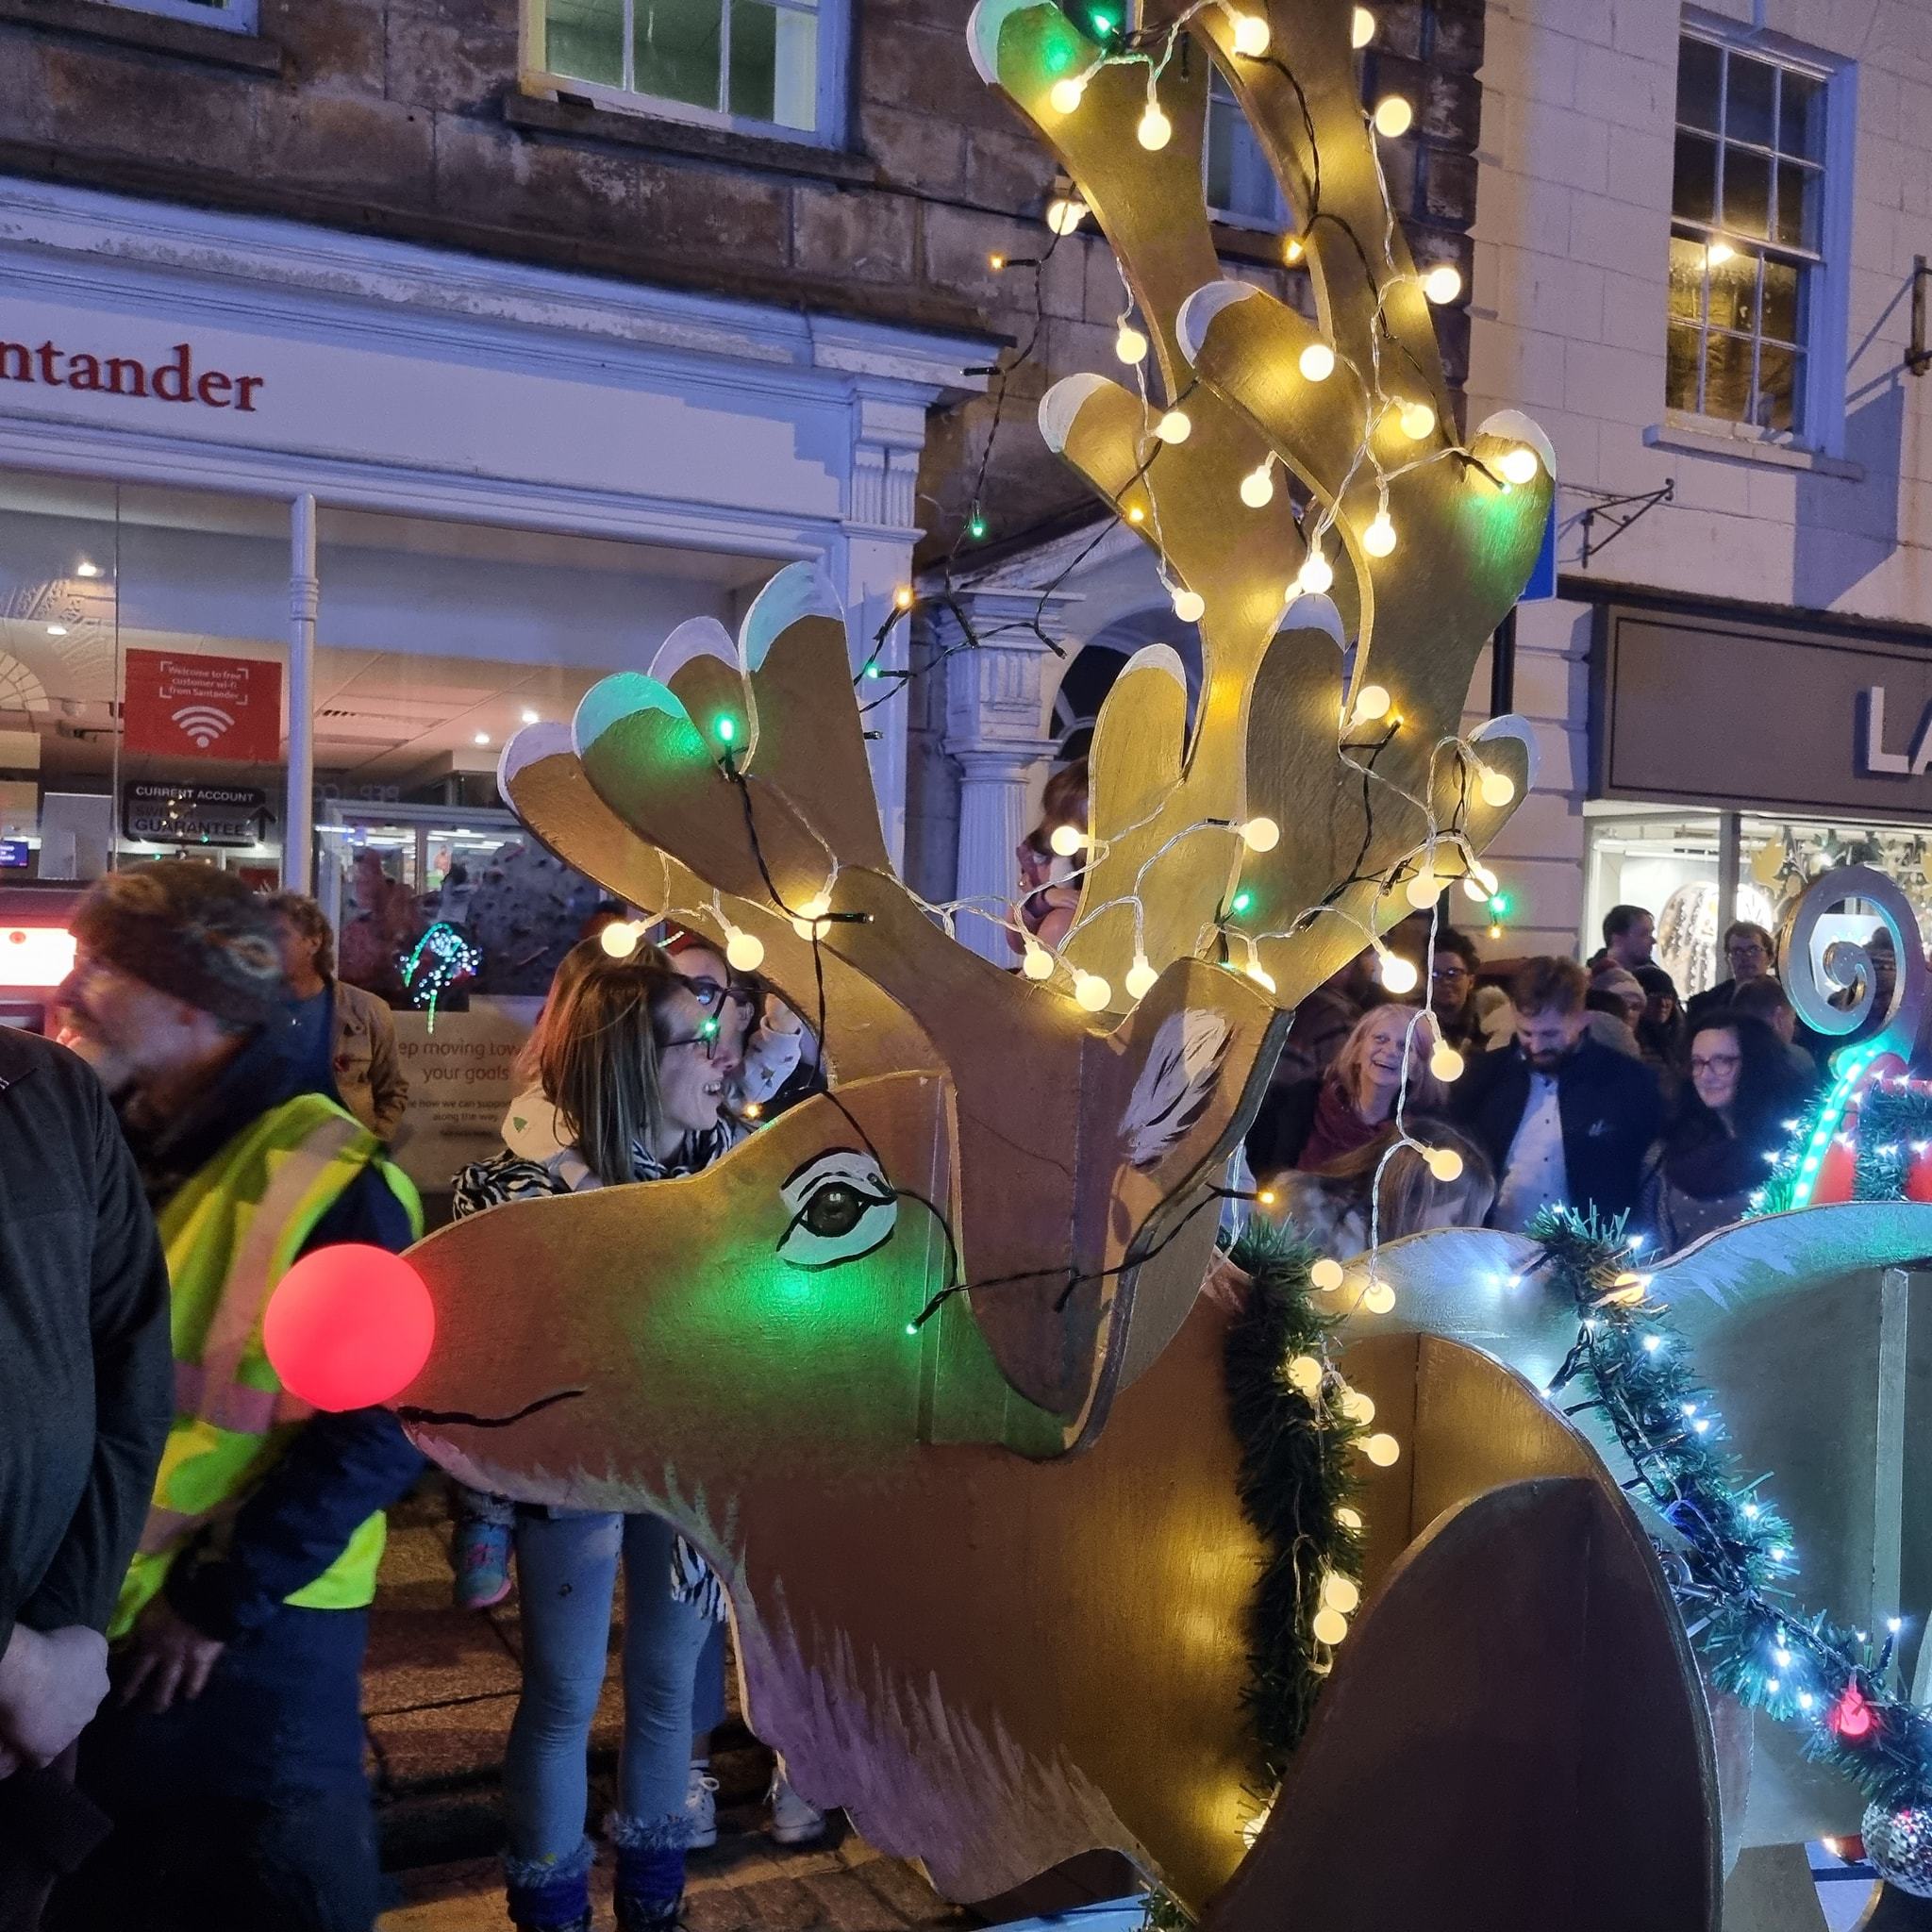 Rudolph with his red nose helped pull the sleigh Pictures: Truro BID